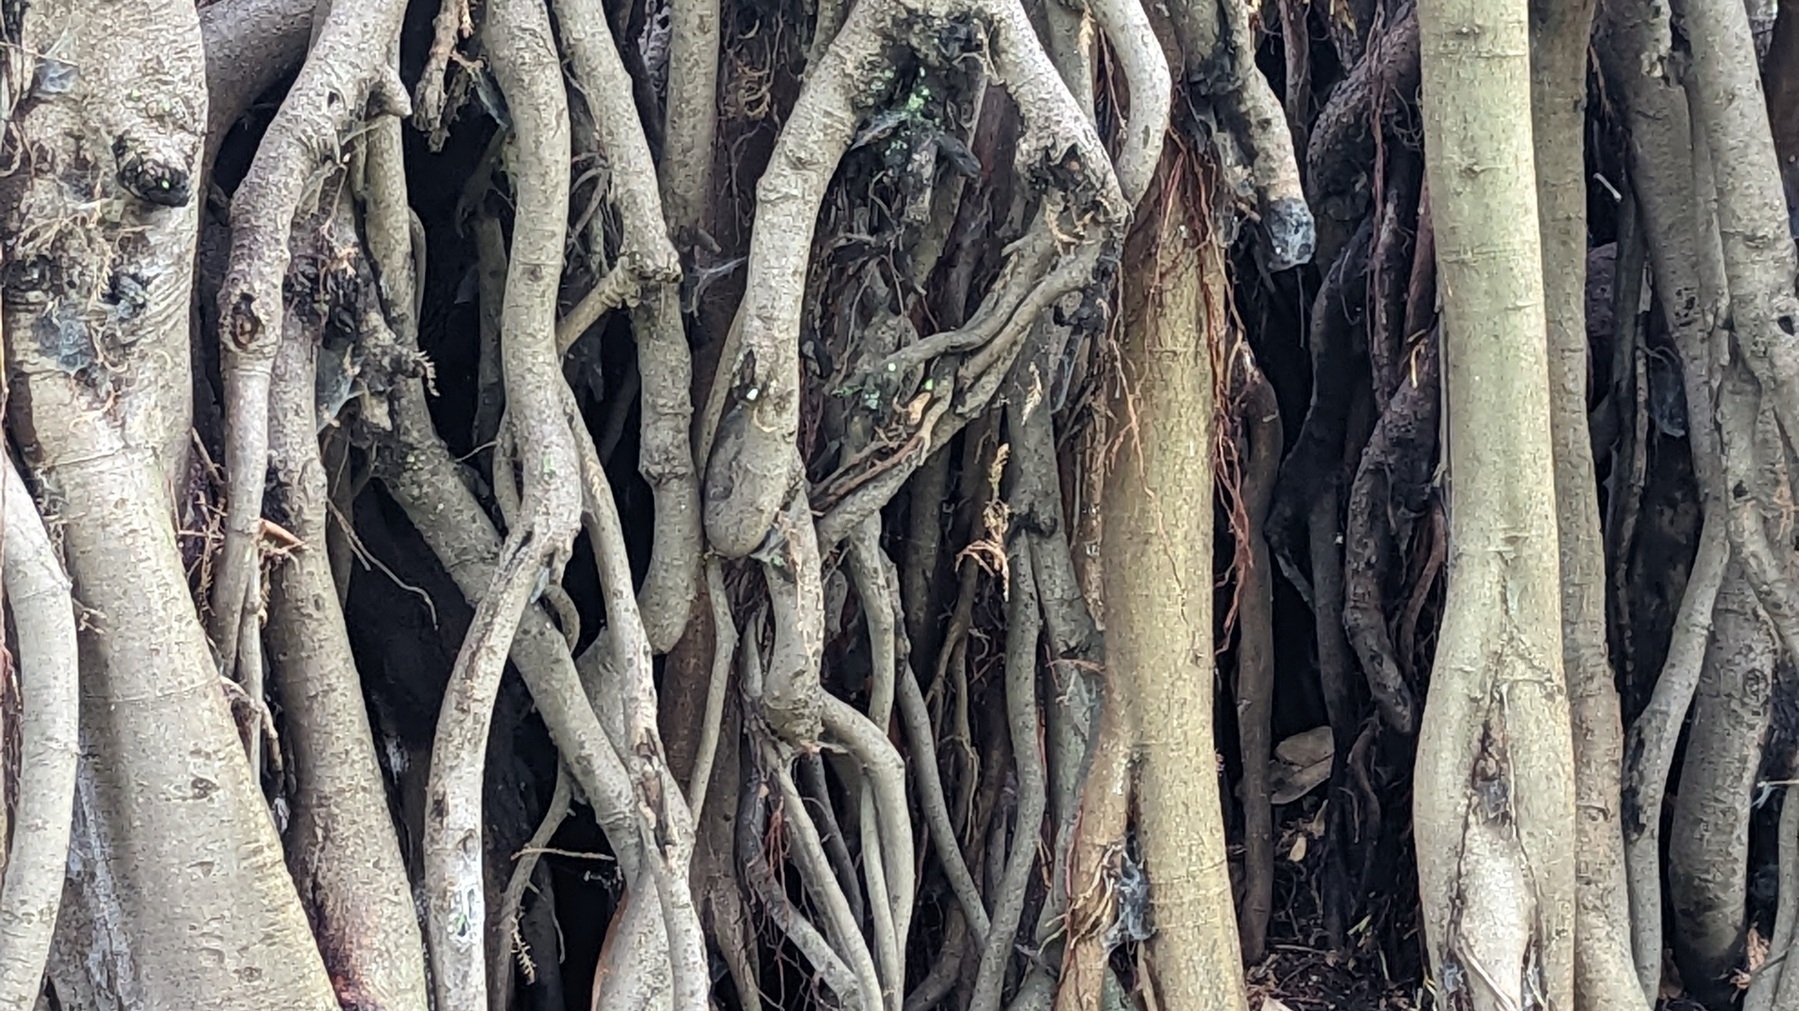 The roots of a fig tree in Sydney Botanic Gardens